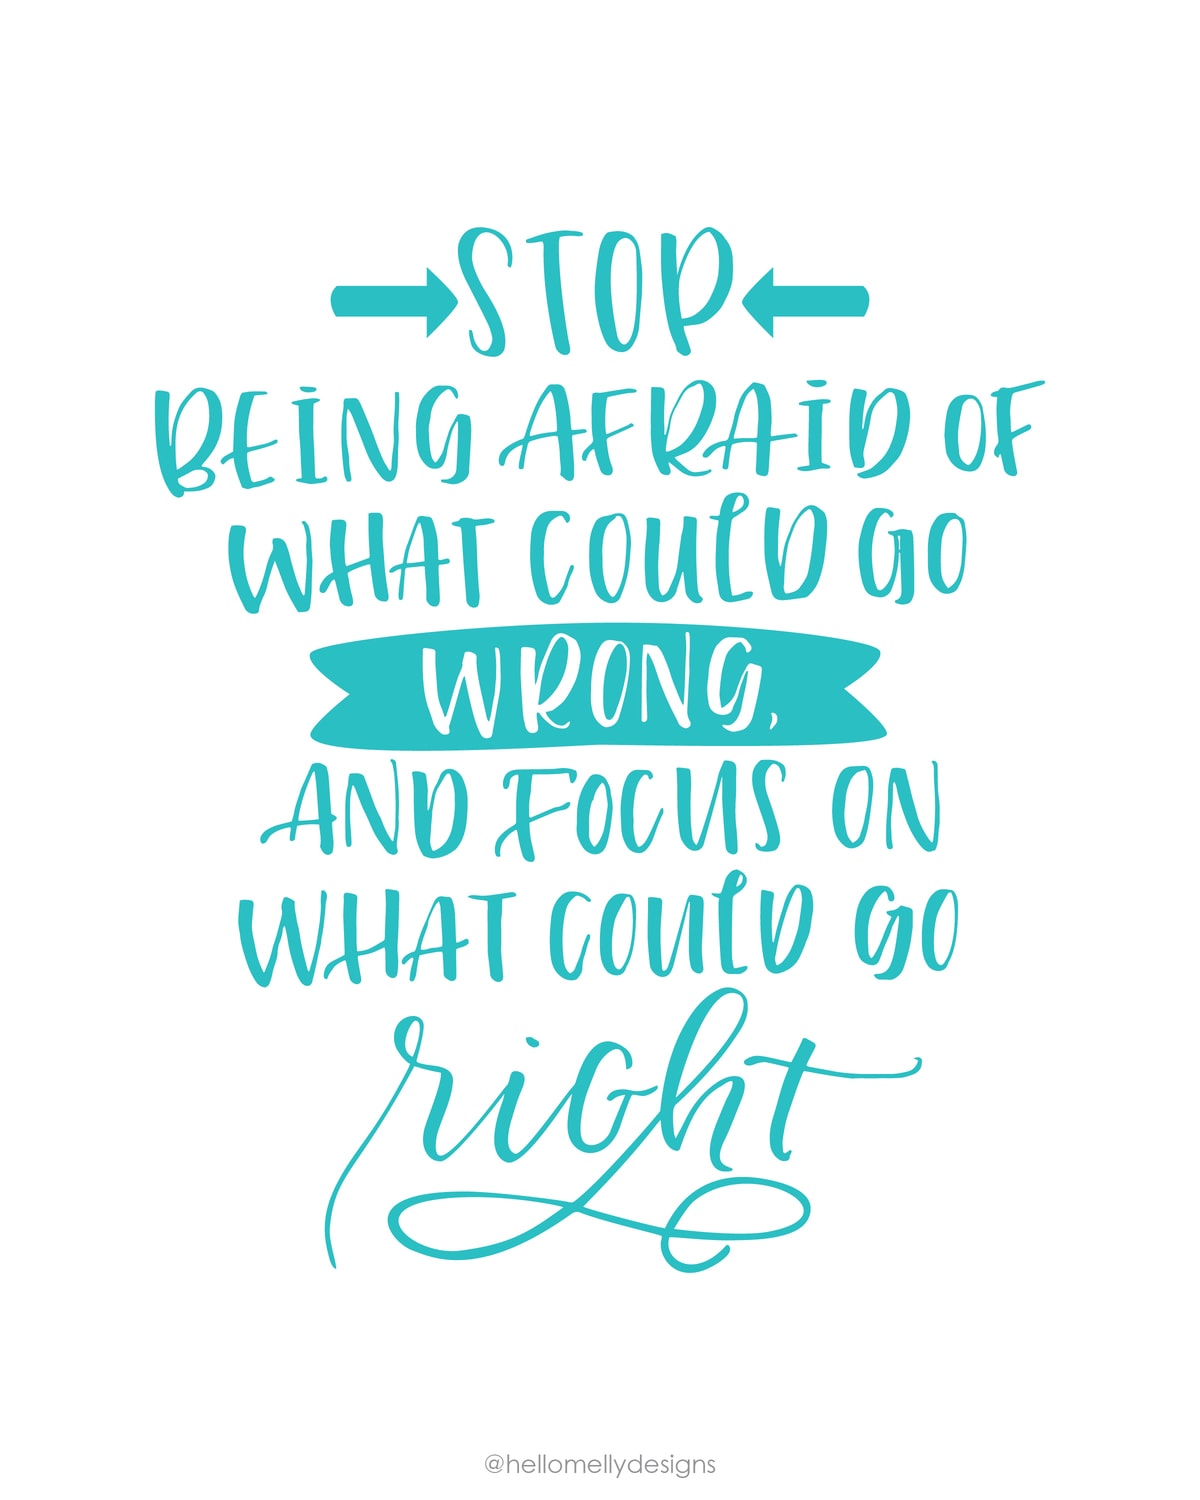 Stop being afraid of what could go wrong, and focus on what could go right. One of my favorite quotes and available for FREE download in 3 colors!